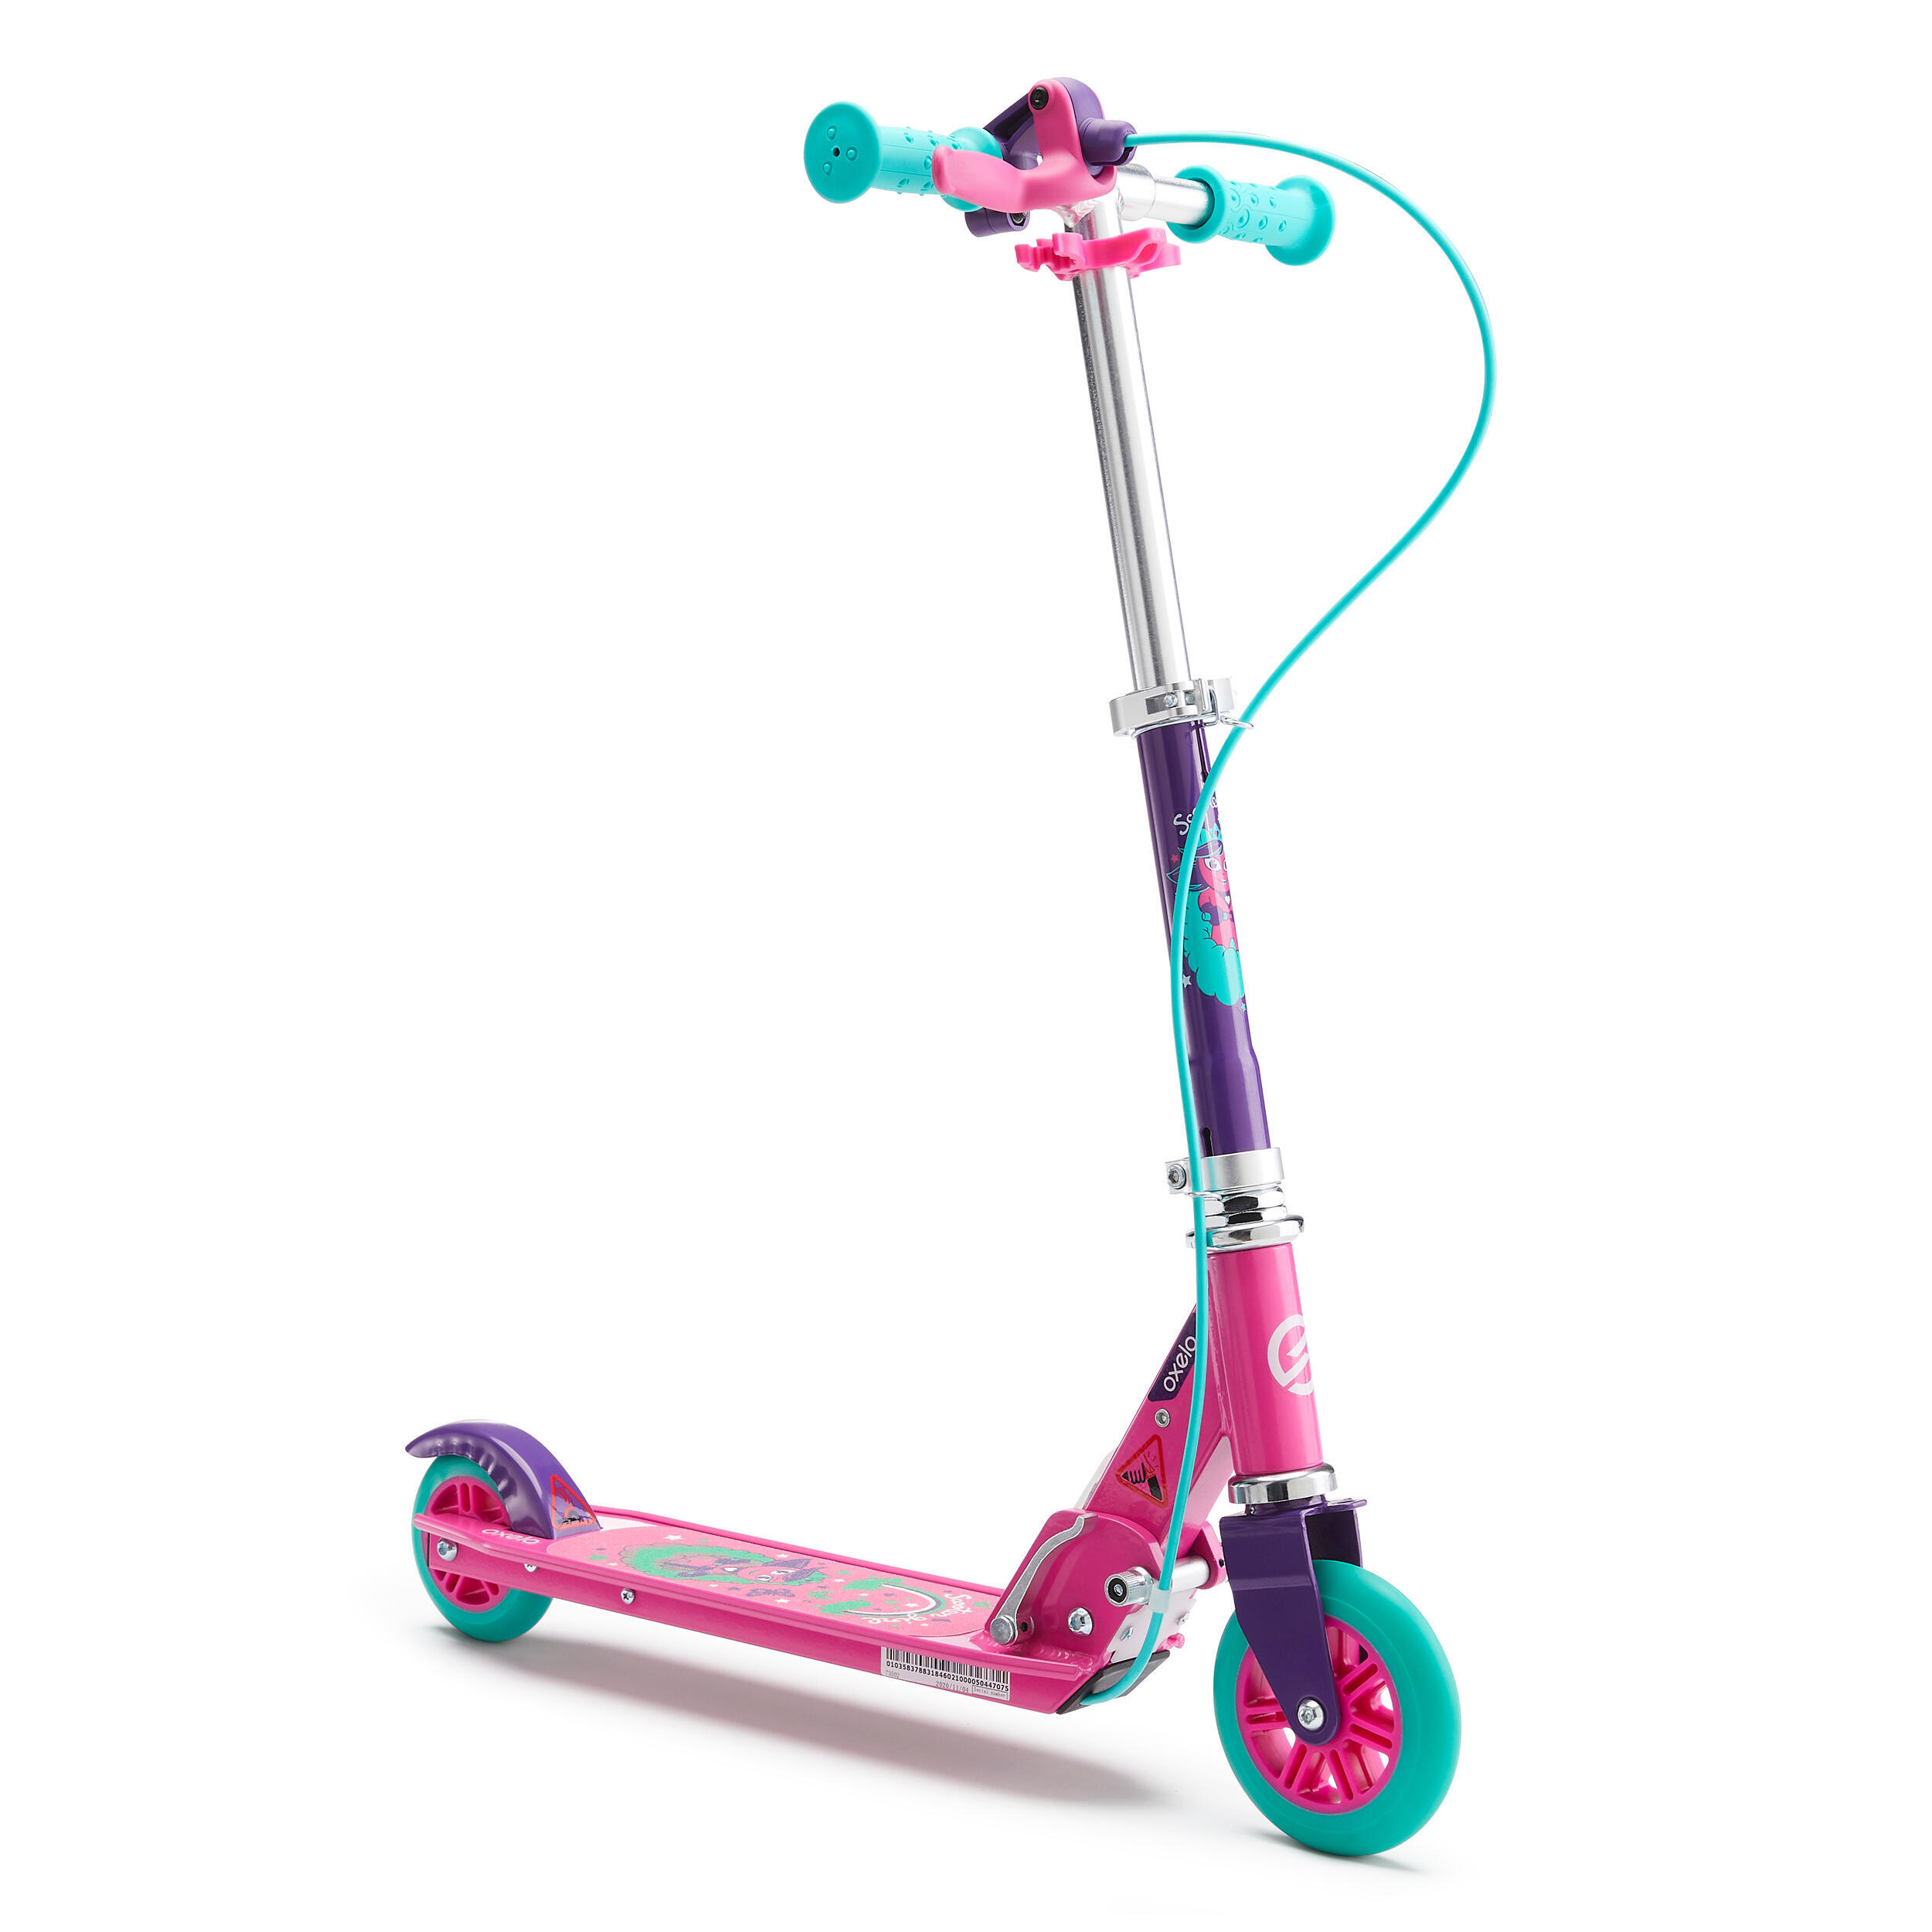 OXELO Kids' Scooter with Brake Play 5 - Purple